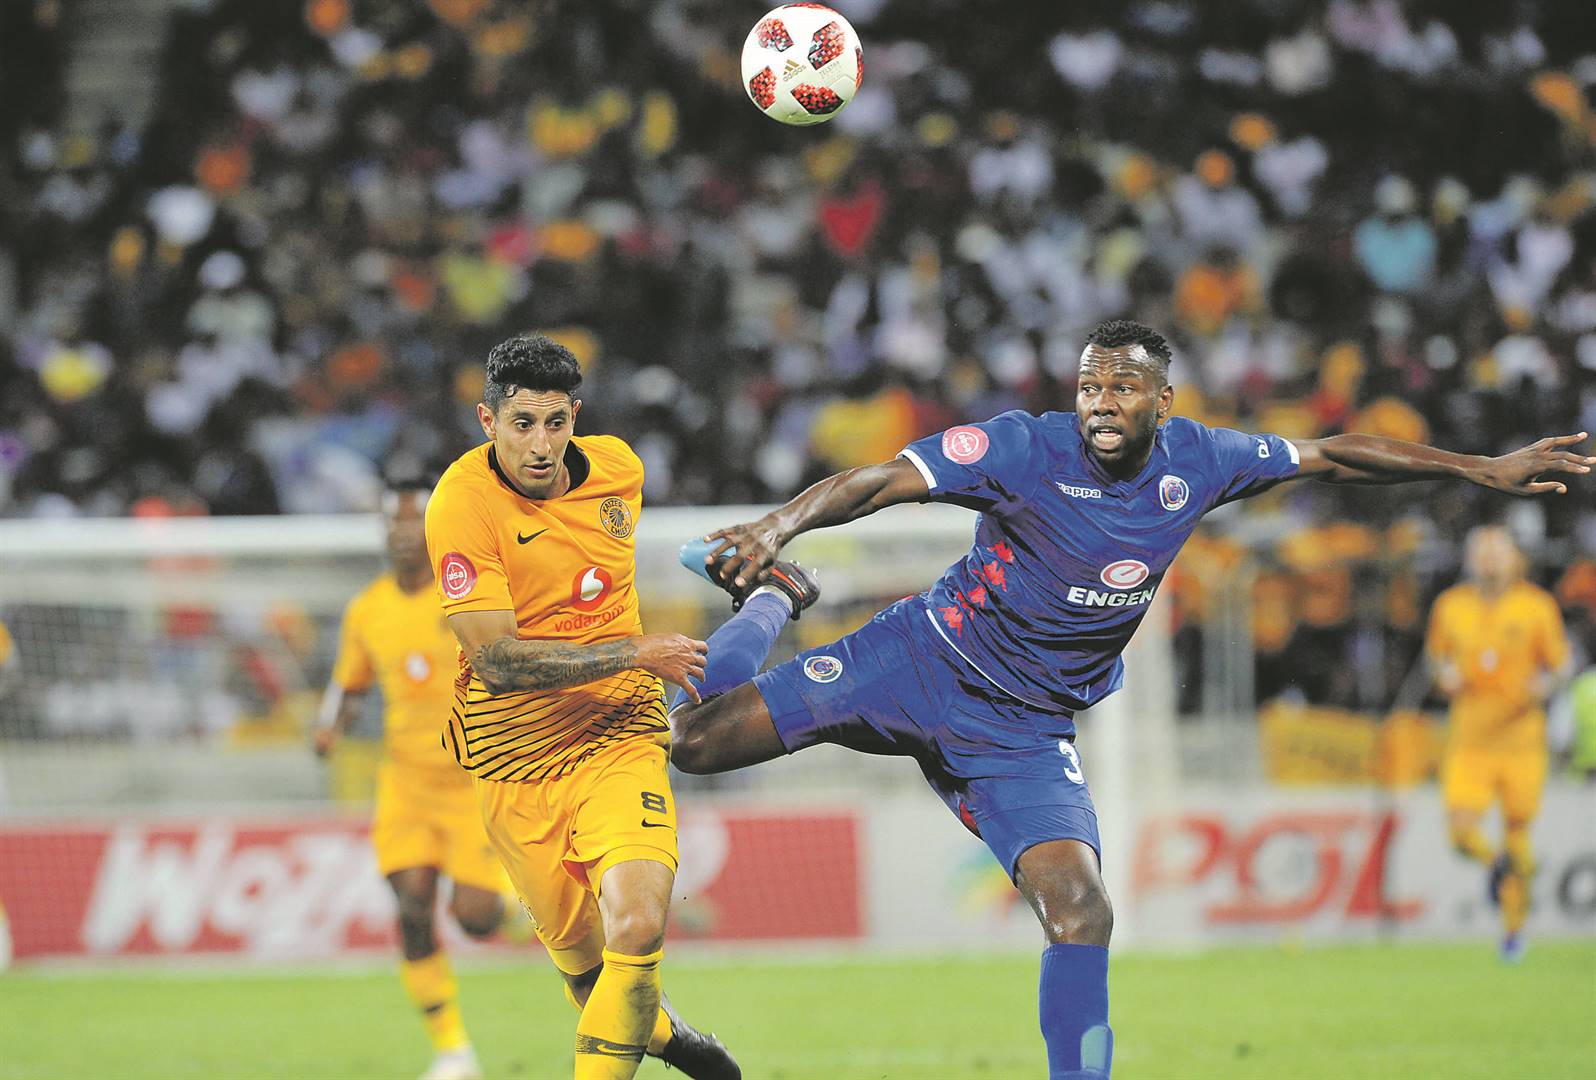 Bongani Khumalo of SuperSport United has donated one month’s salary to buy food parcels for needy families in Pretoria and his country of birth, EswatiniPHOTO: Sydney Mahlangu / BackpagePix